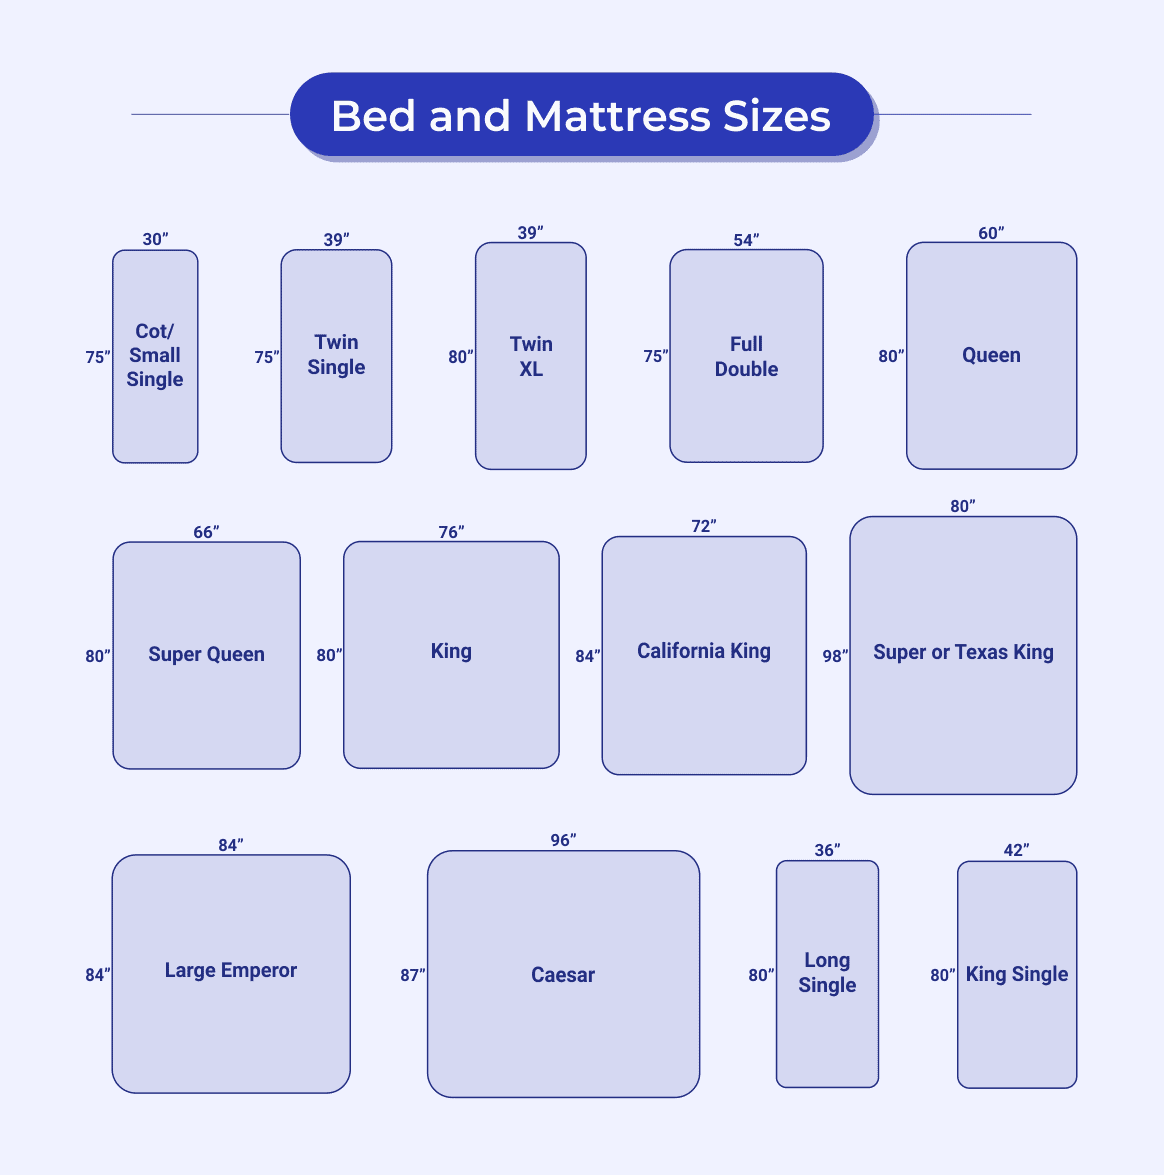 Mattress And Bed Sizes What Are The, Dimensions Of A Super King Size Bed In Feet